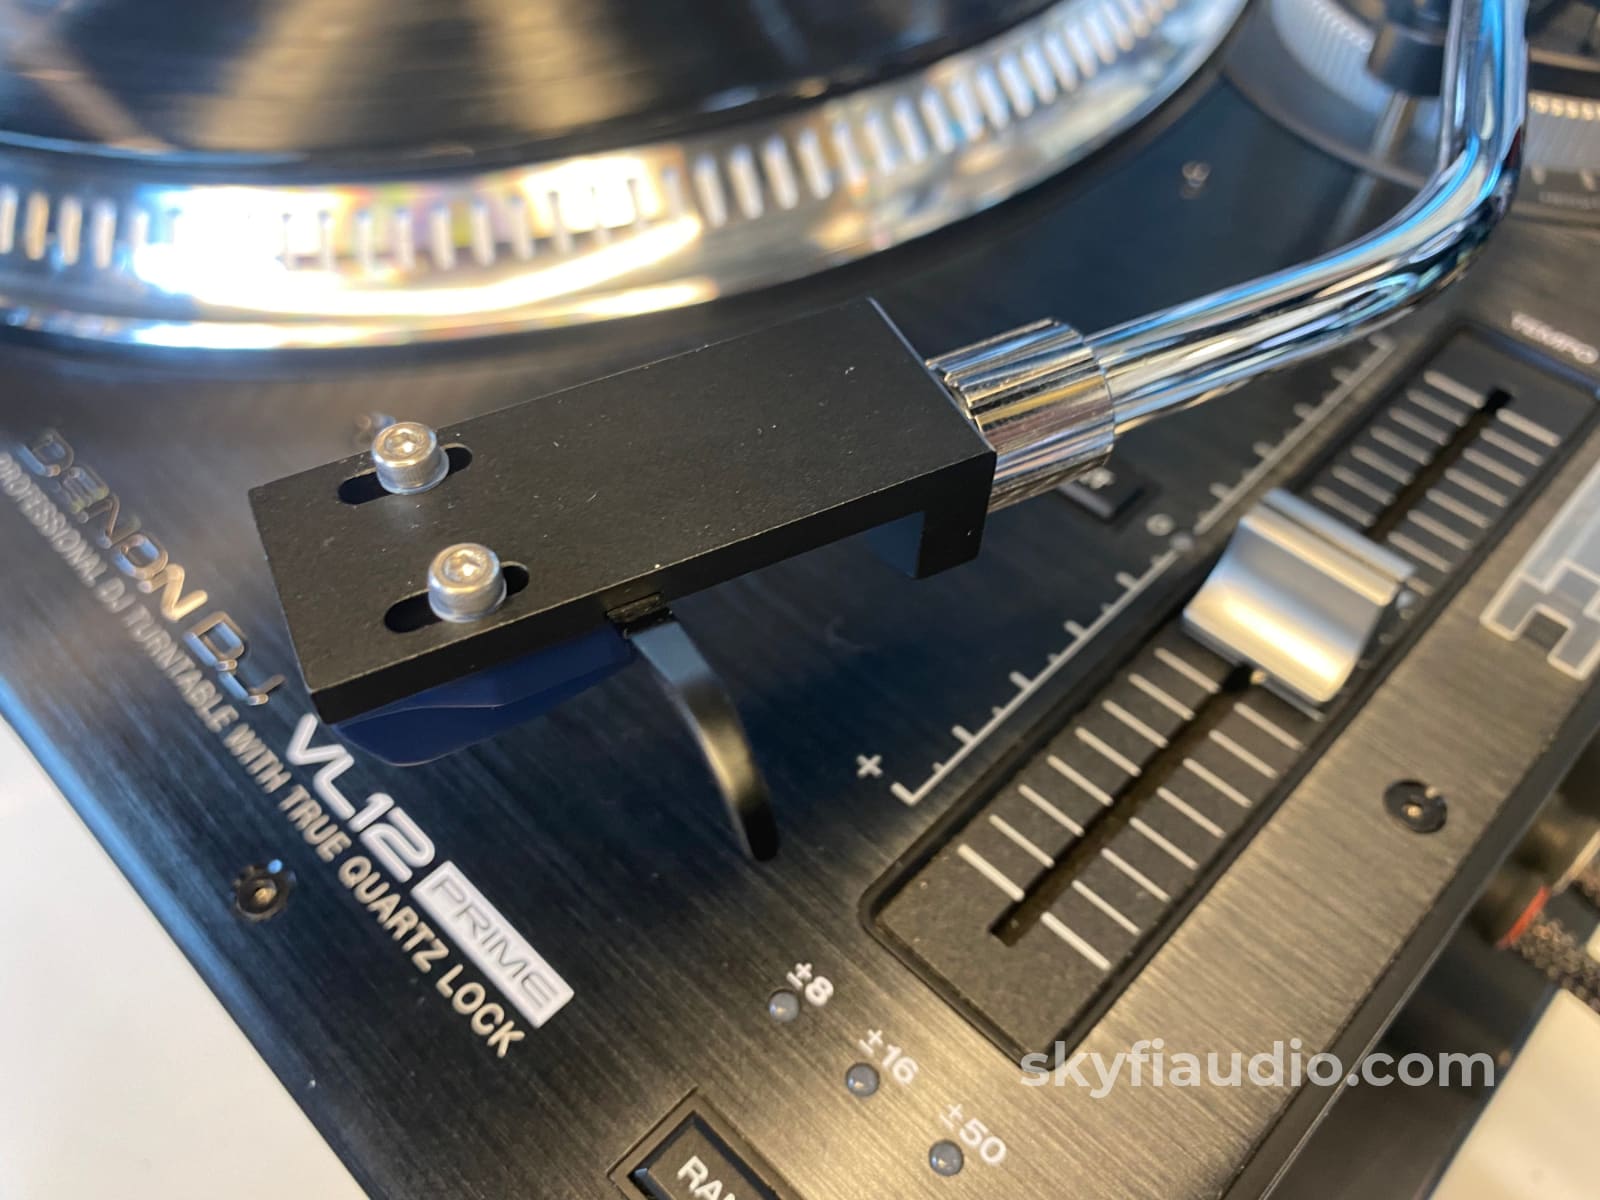 Denon Vl12 Prime Turntable - Skyfi Upgraded With New Sumiko And More